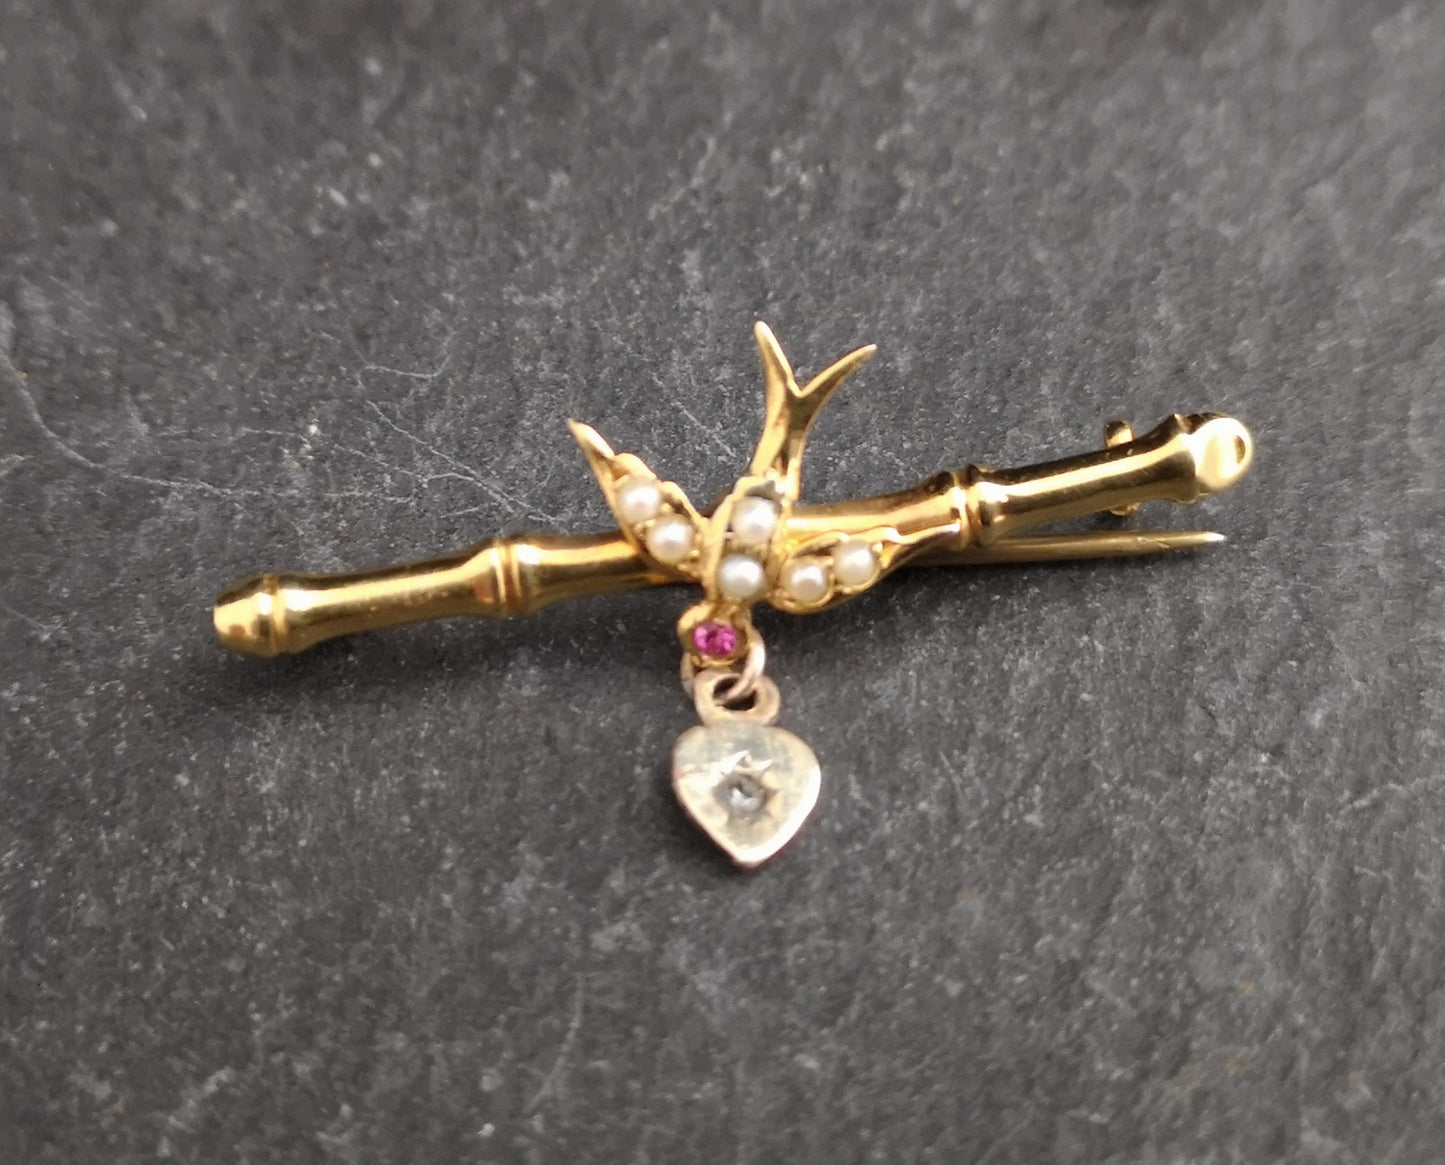 Antique Irish 9ct gold swallow brooch, Ruby, pearl and diamond